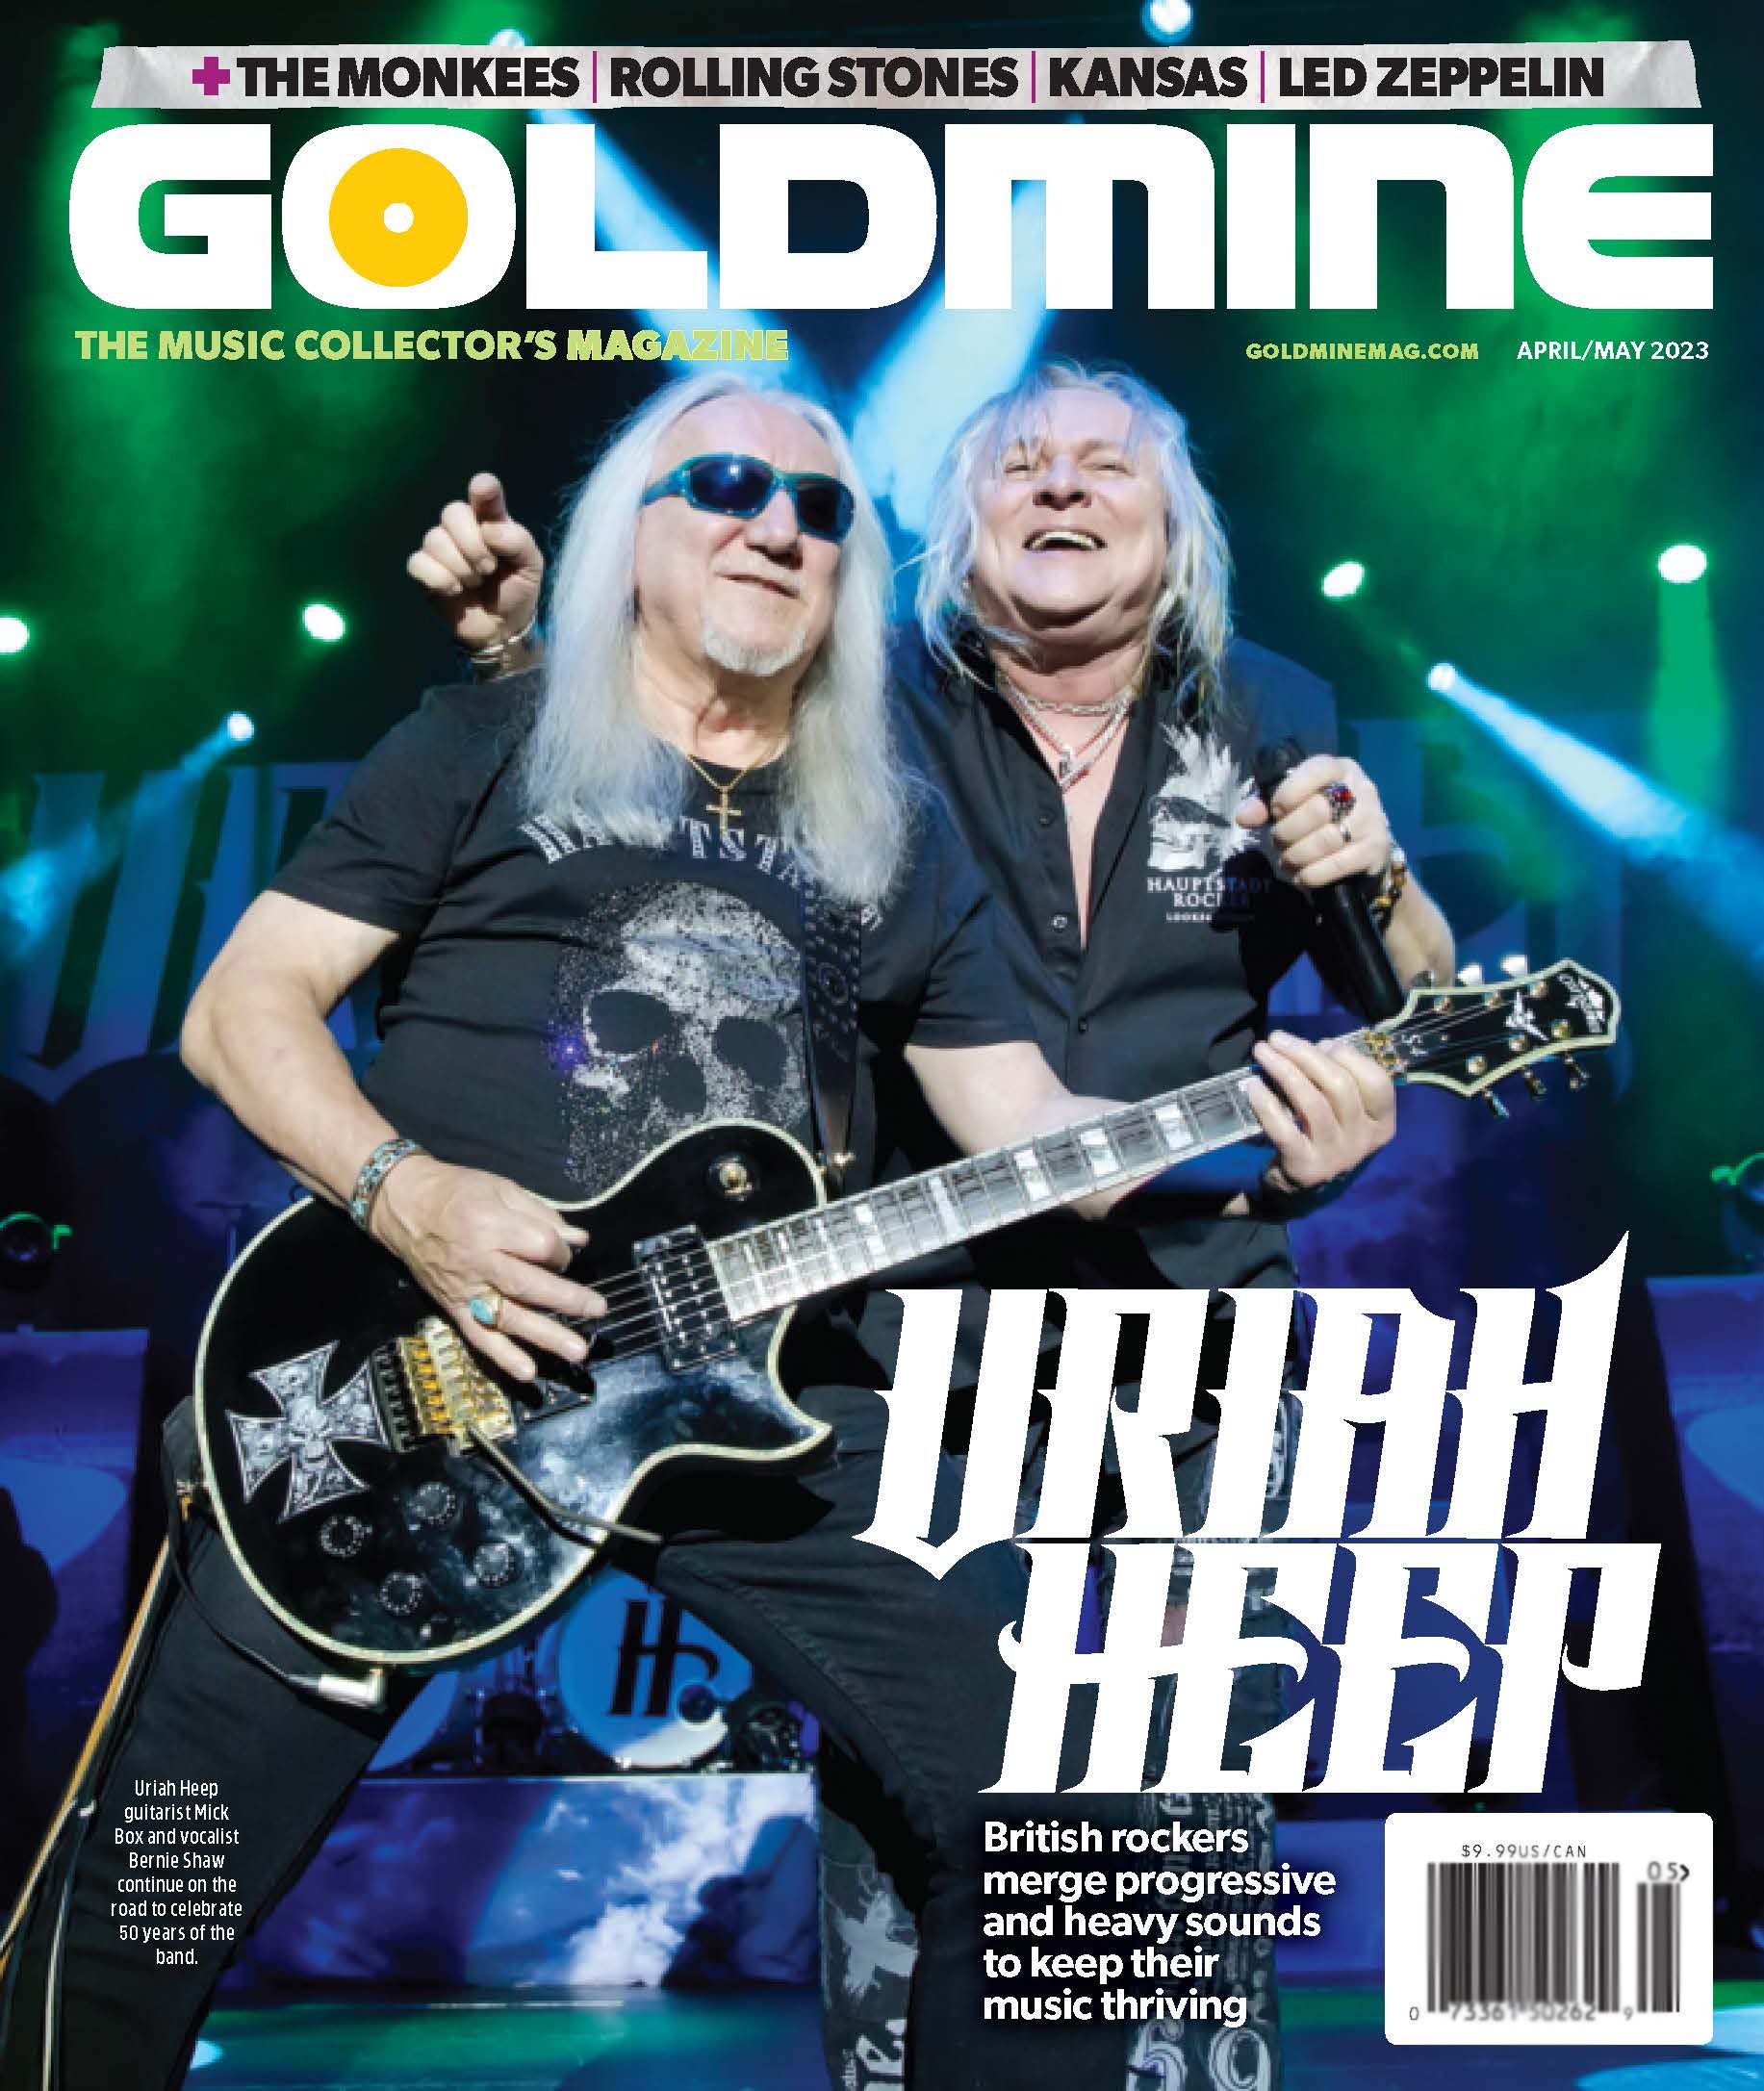 GOLDMINE MAGAZINE: APRIL/MAY 2023 ISSUE FEATURING URIAH HEEP